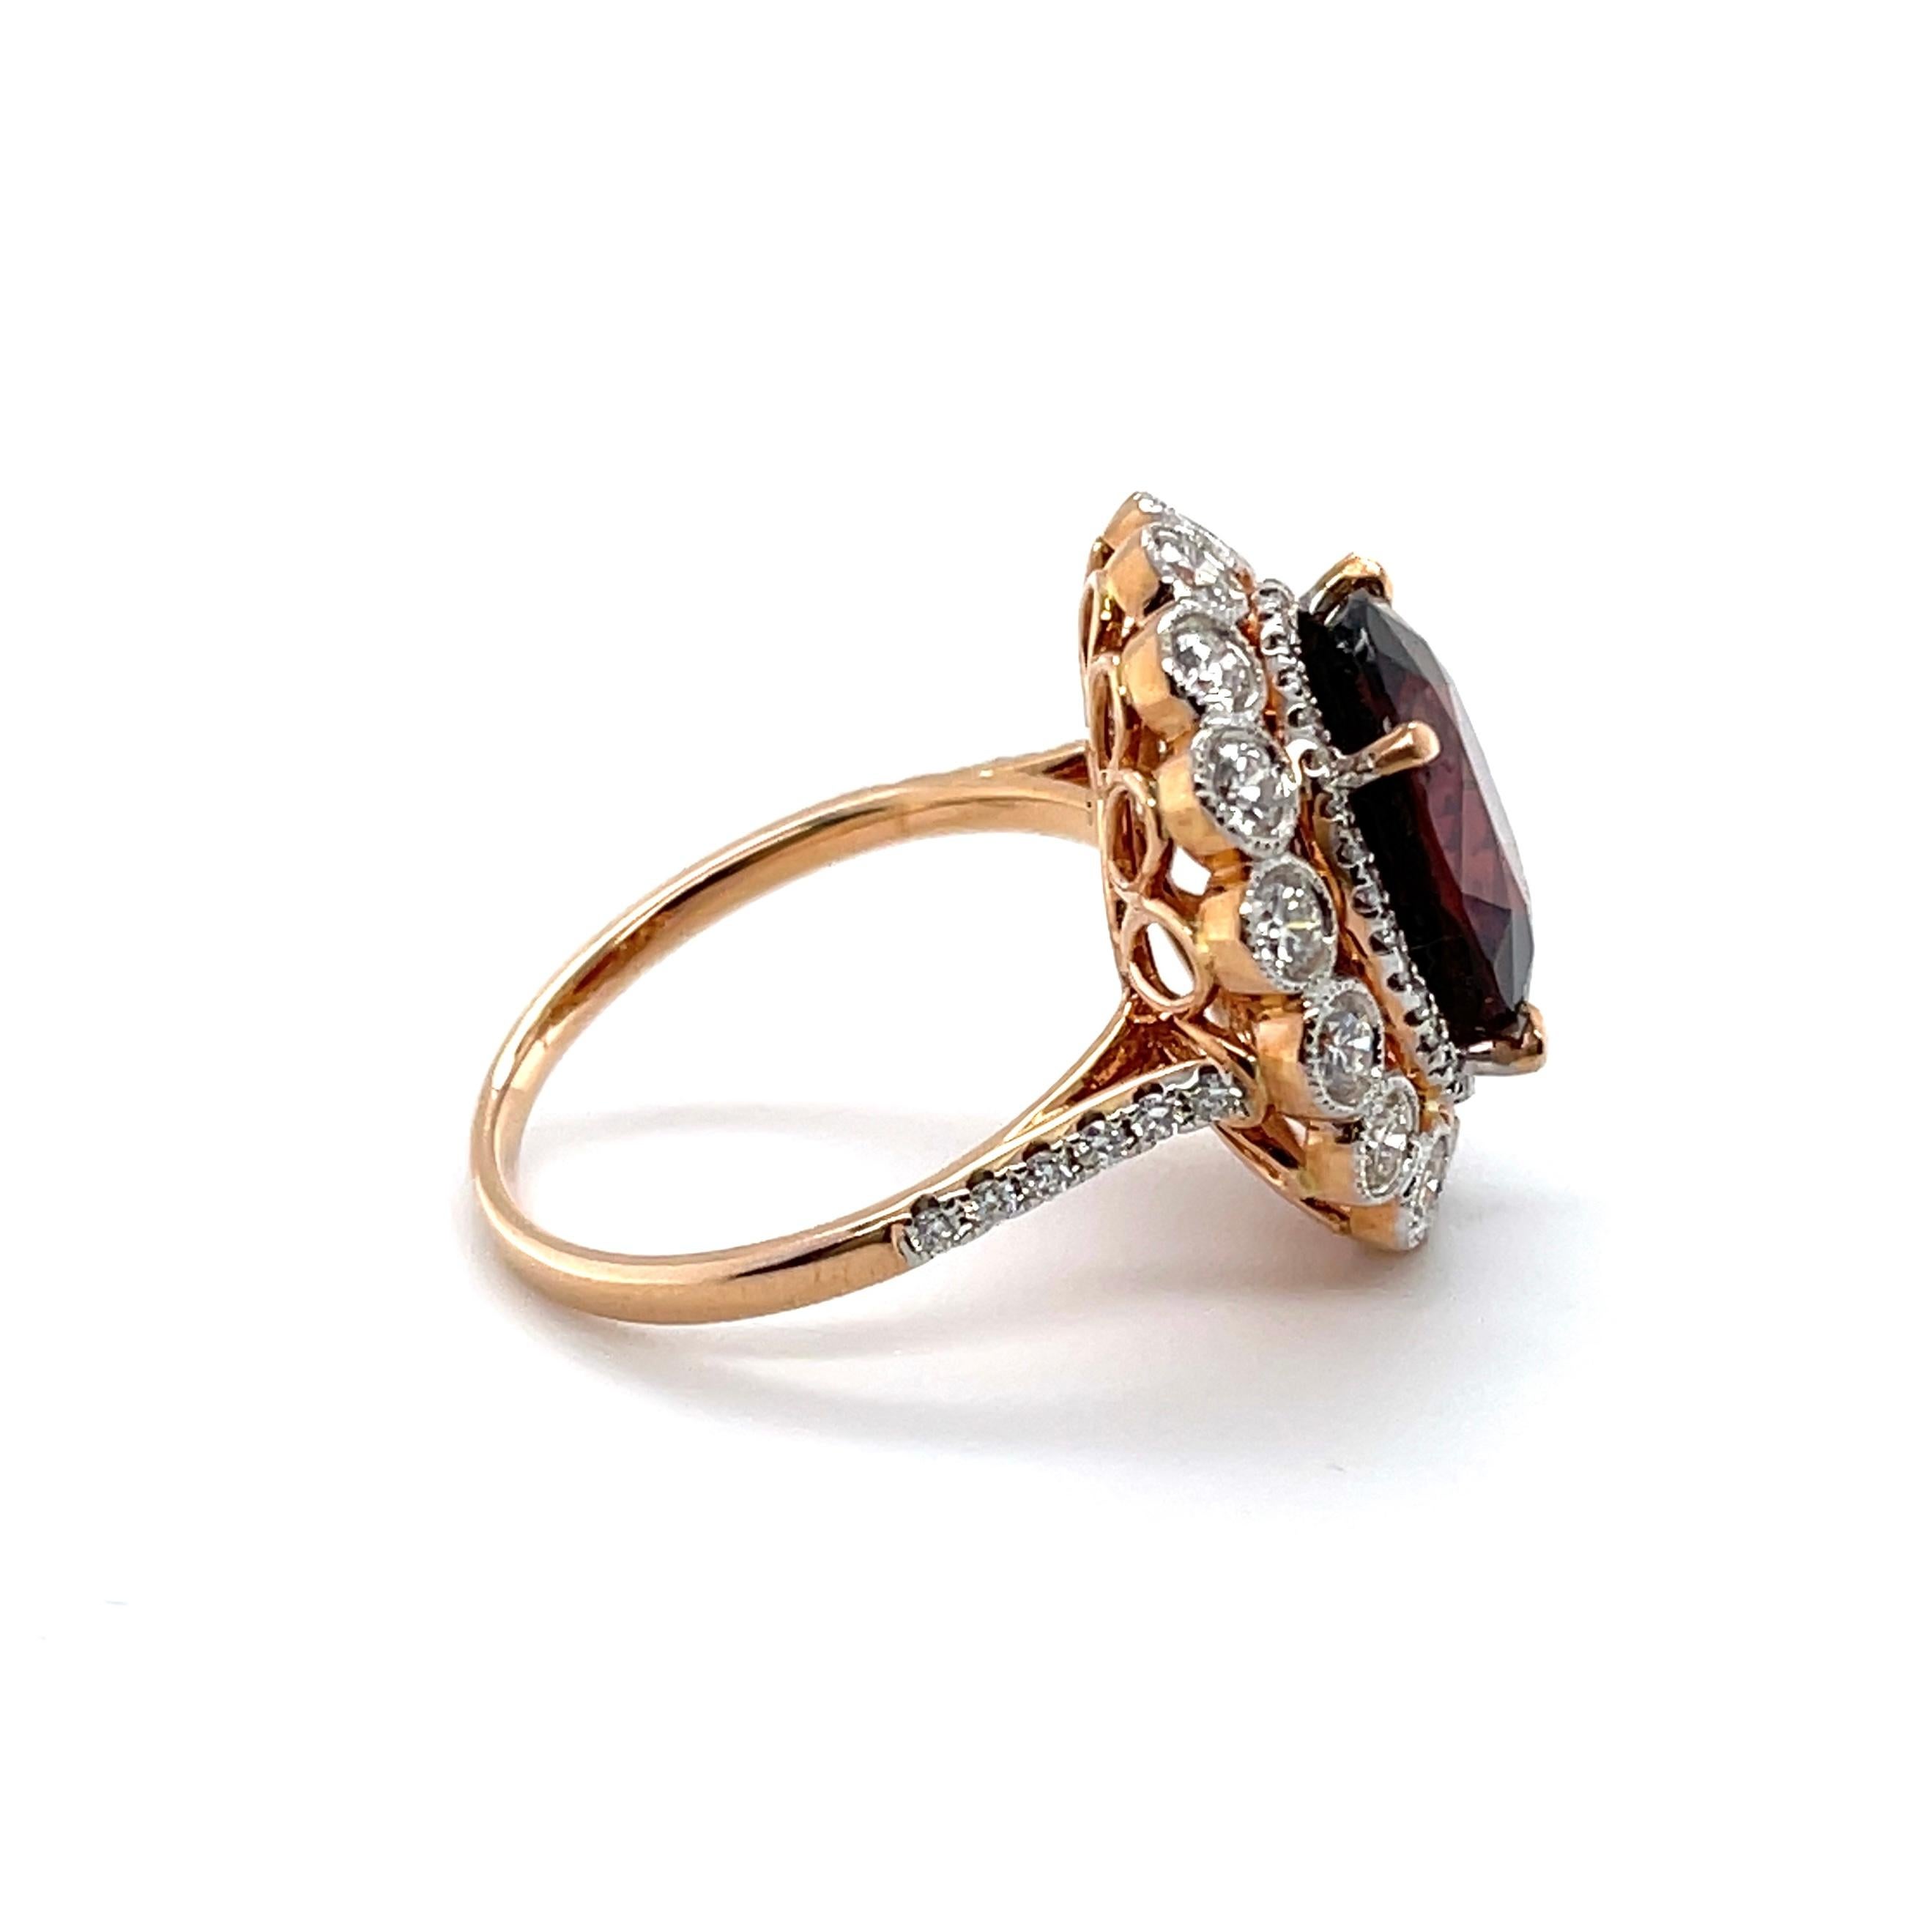 Oval cut Myanmar Natural Spinel, crafted with eighteen karat rose gold, featuring fourty-eight micro-claw set round brilliant cut diamonds, sixteen bezel set with millegrain detail round brilliant cut diamonds. complimented with a polished finish